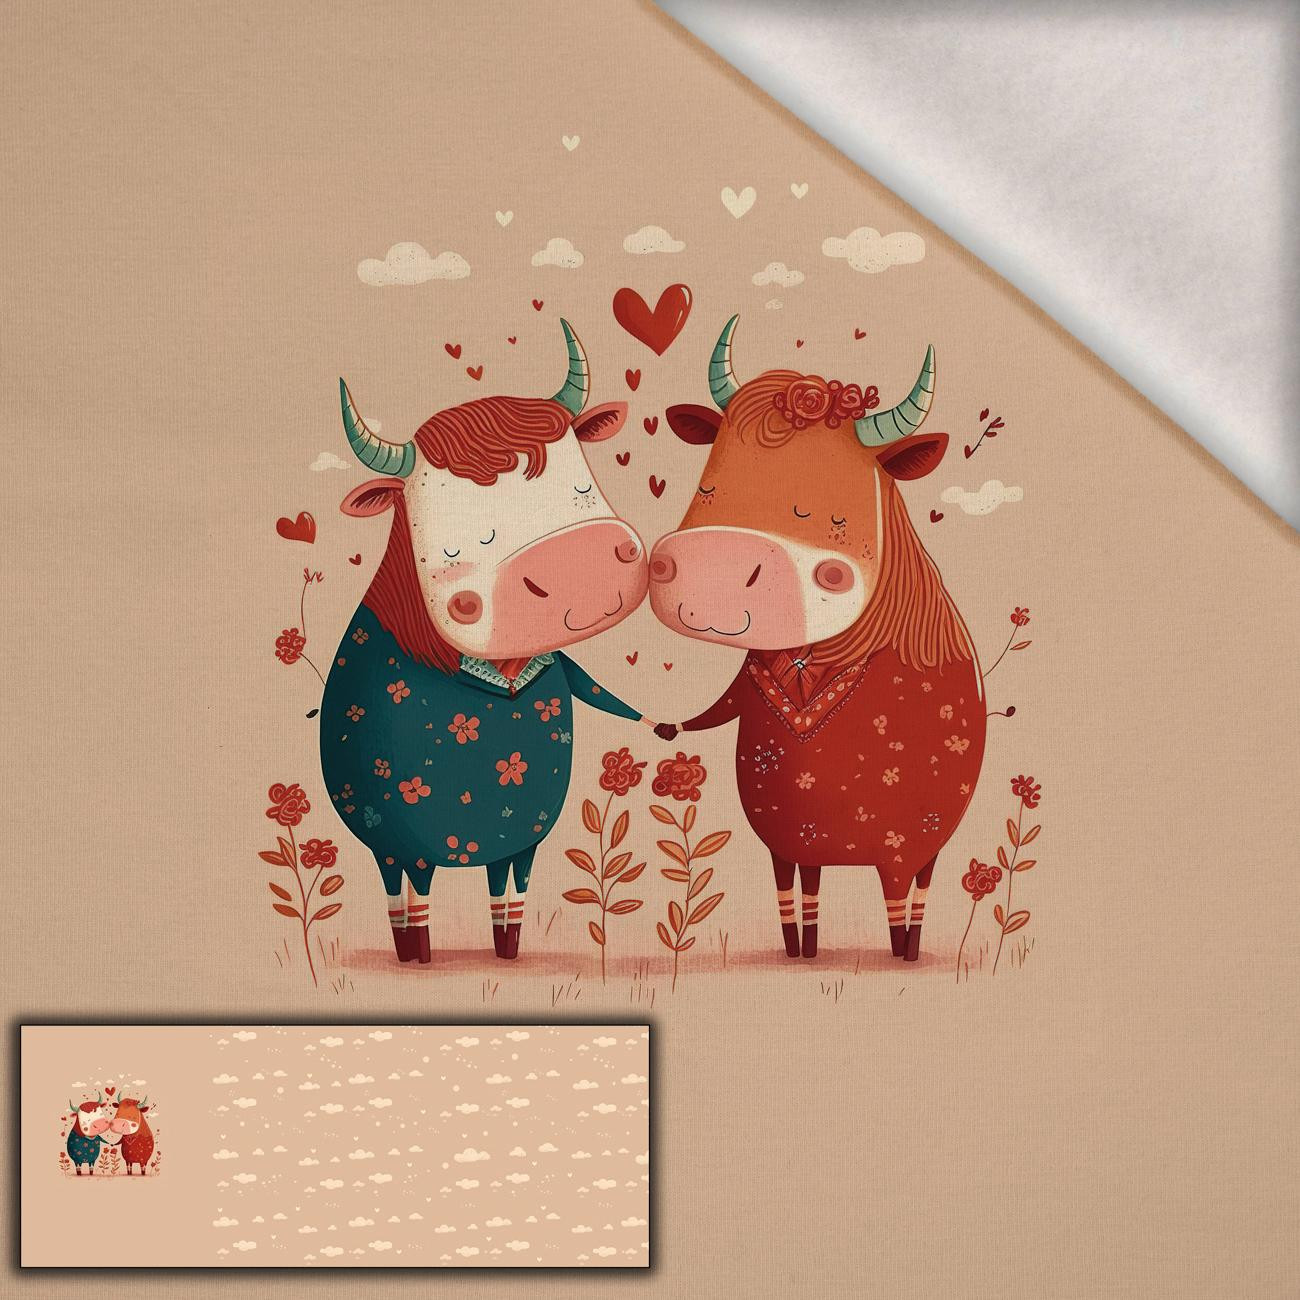 COWS IN LOVE - panoramic panel brushed knitwear with elastane ITY (60cm x 155cm)